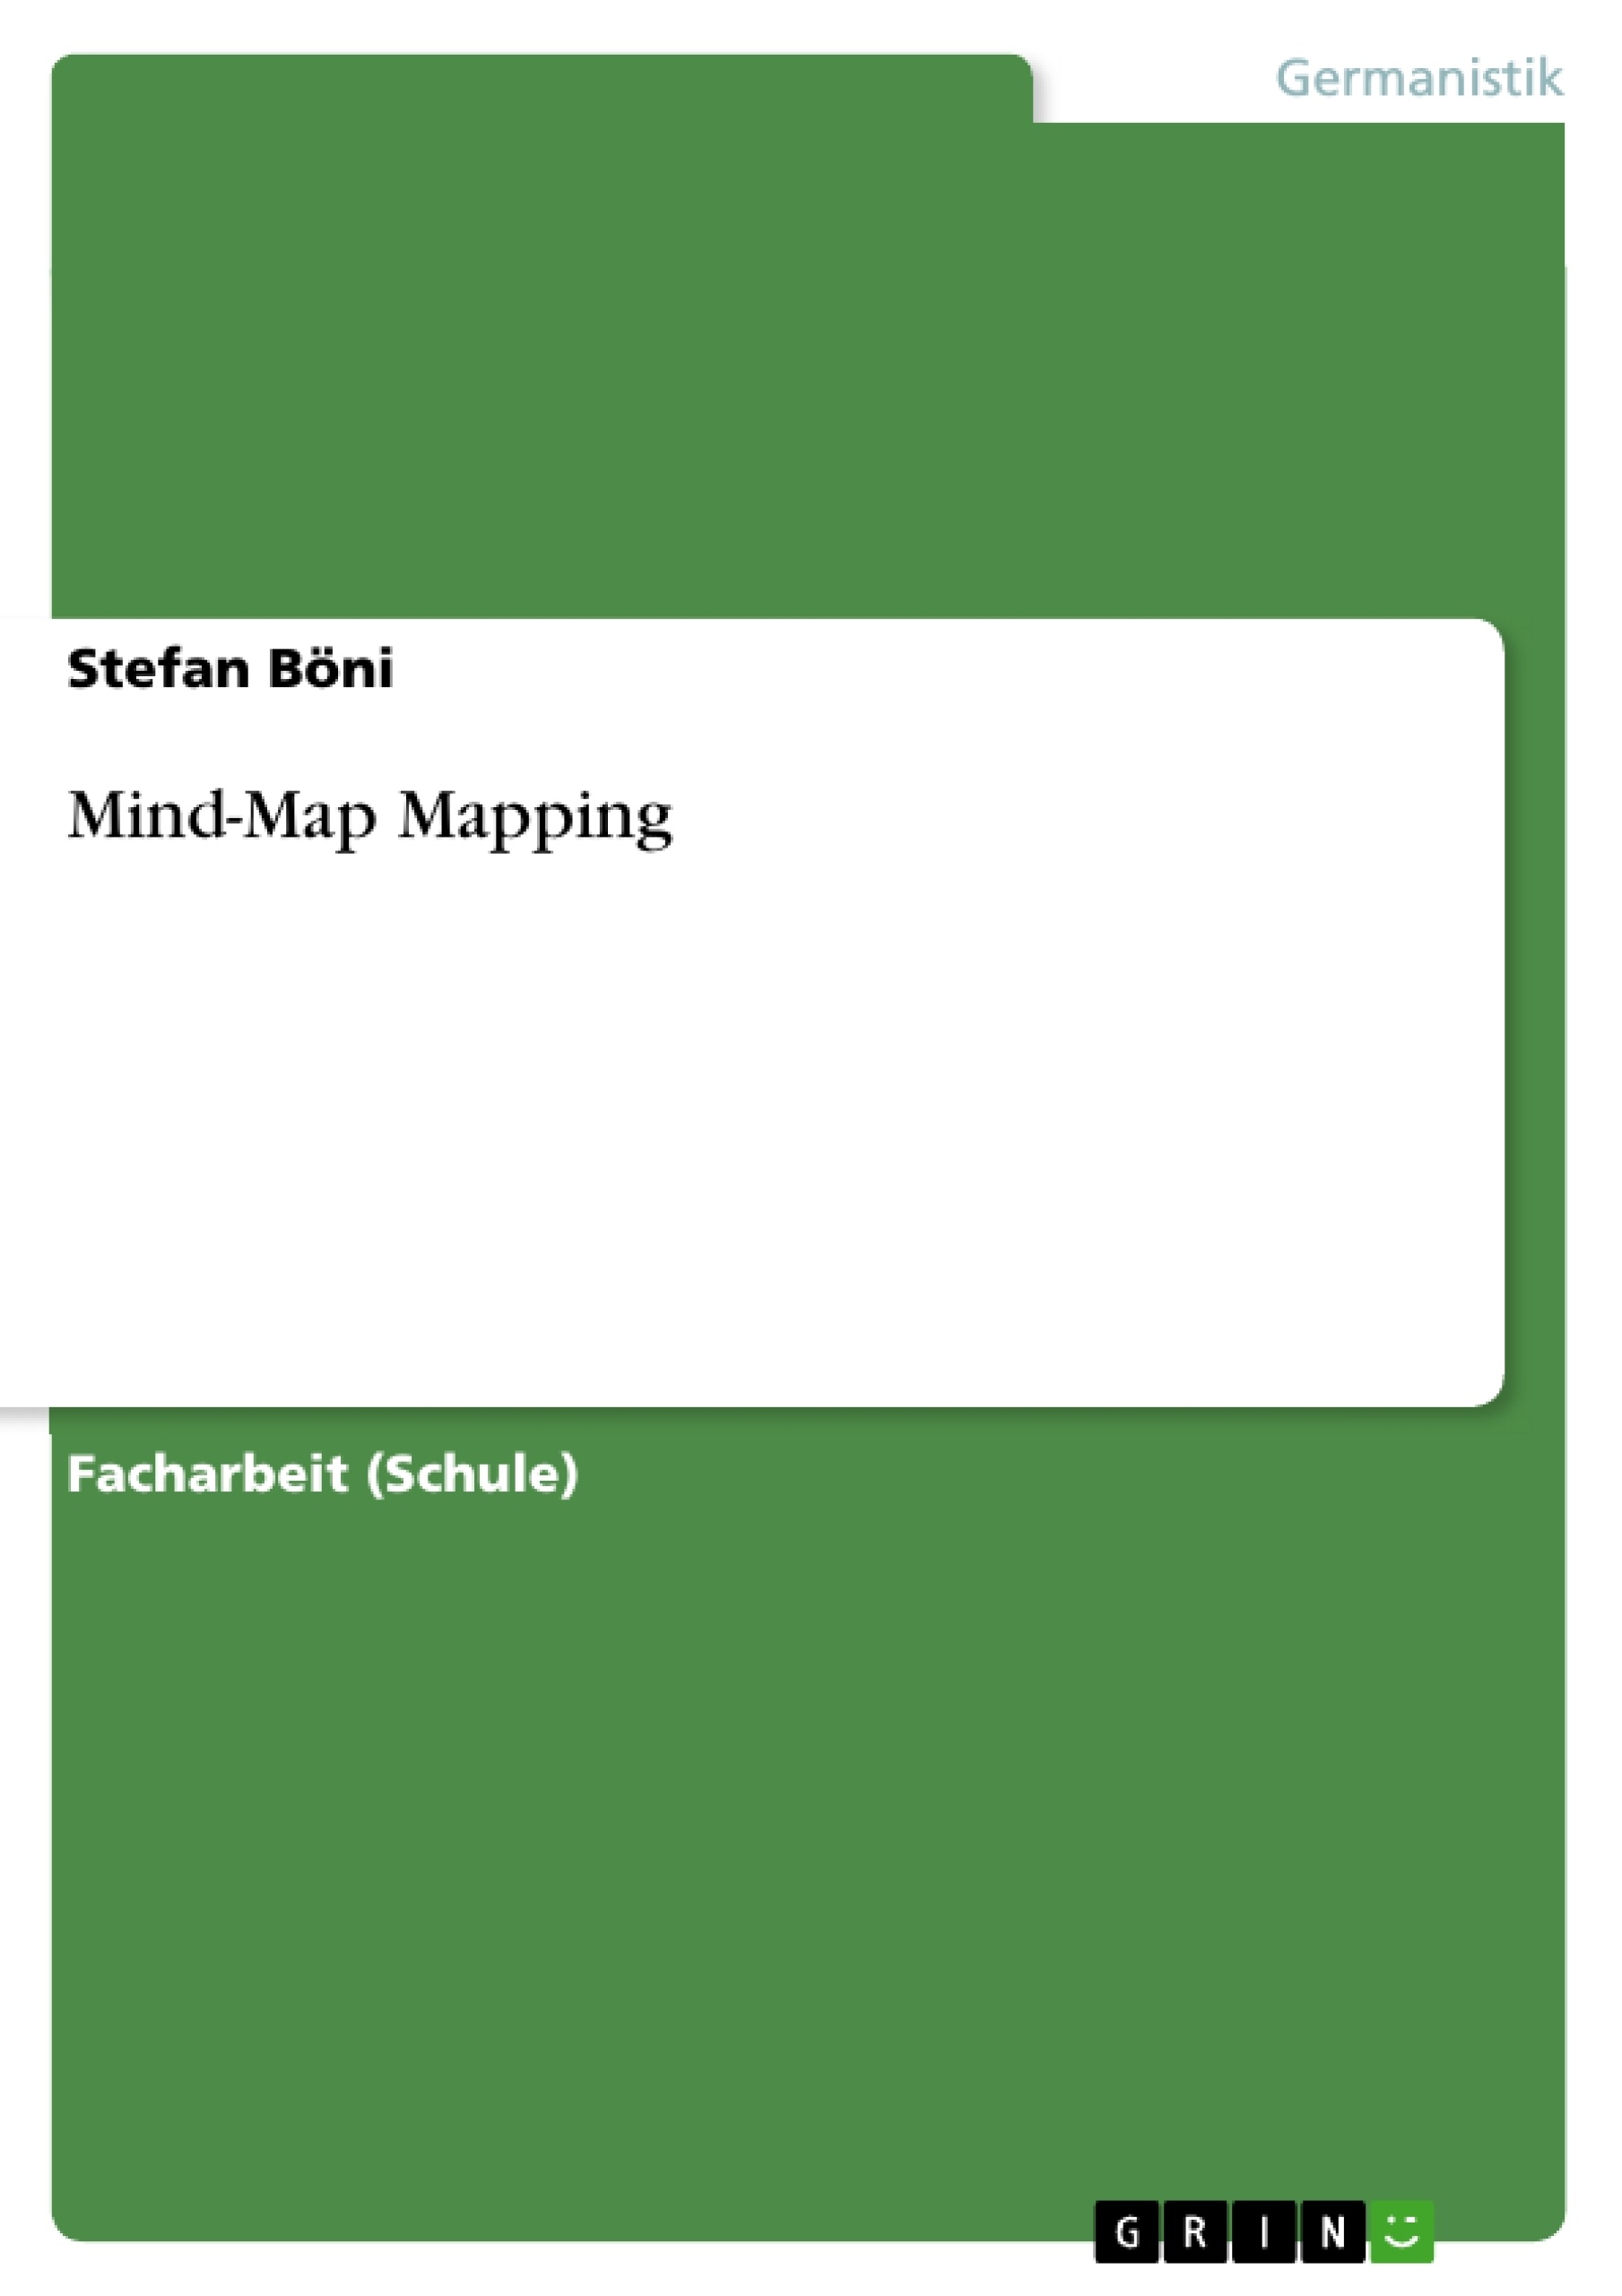 Title: Mind-Map Mapping